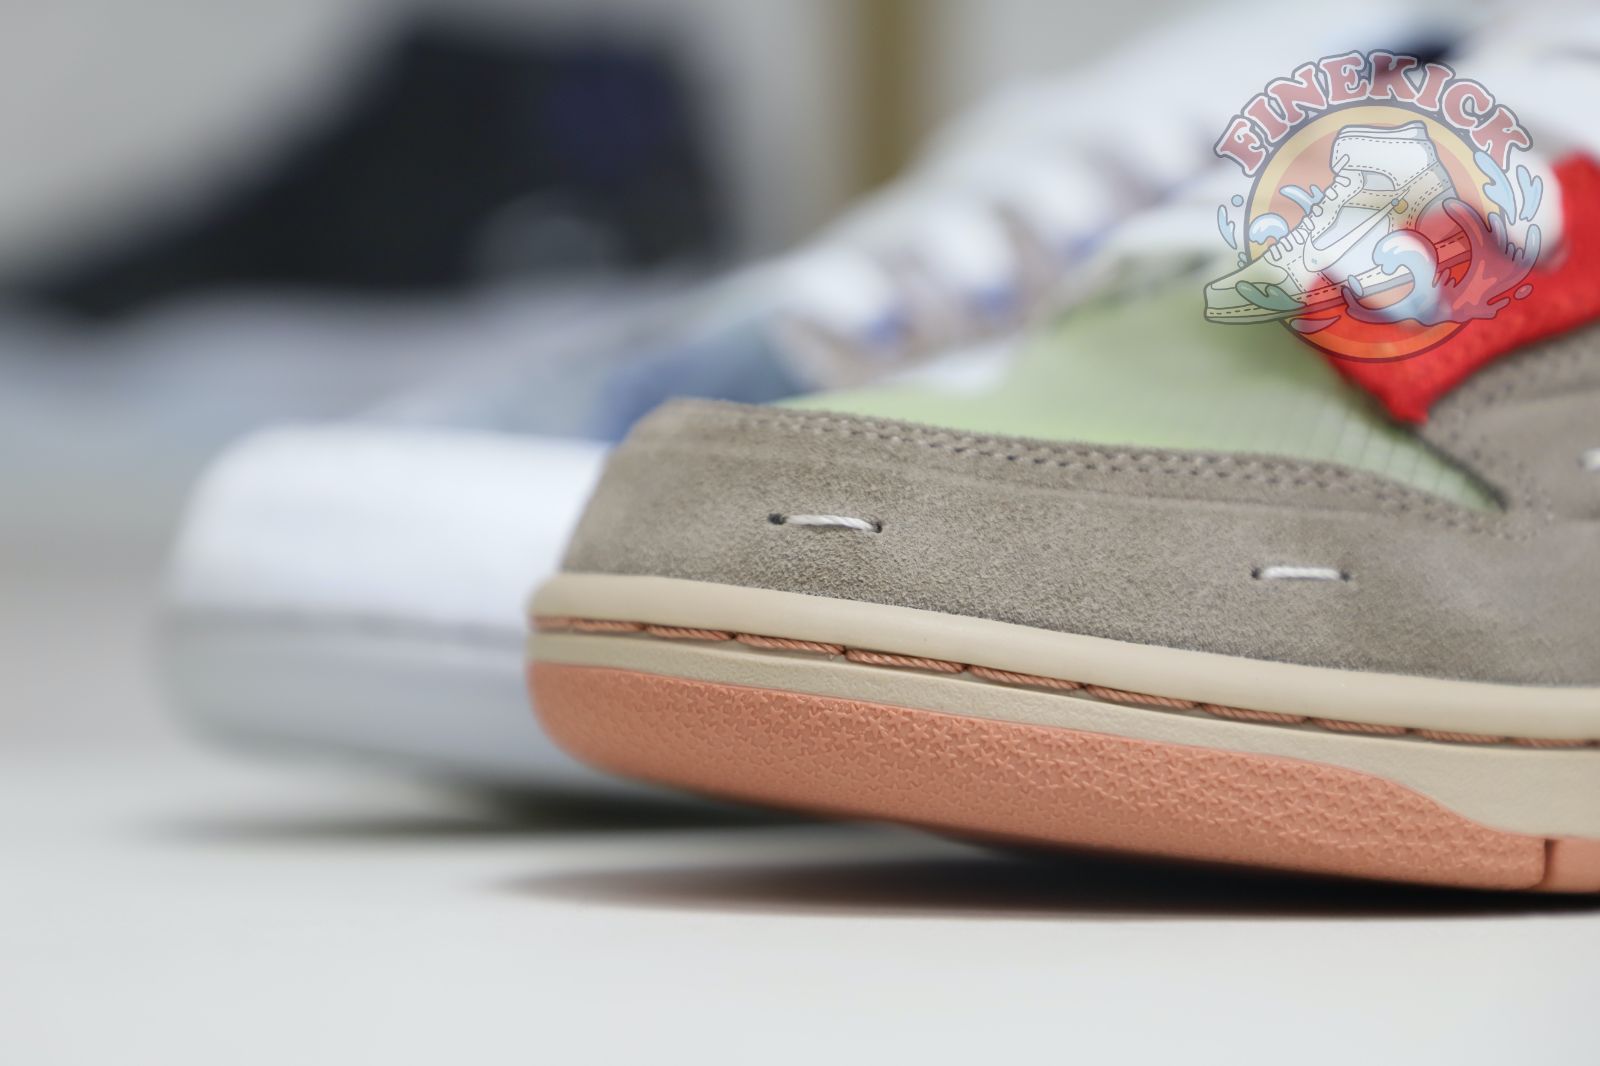 CLOT x Nike Dunk Low"What The?CLOT"